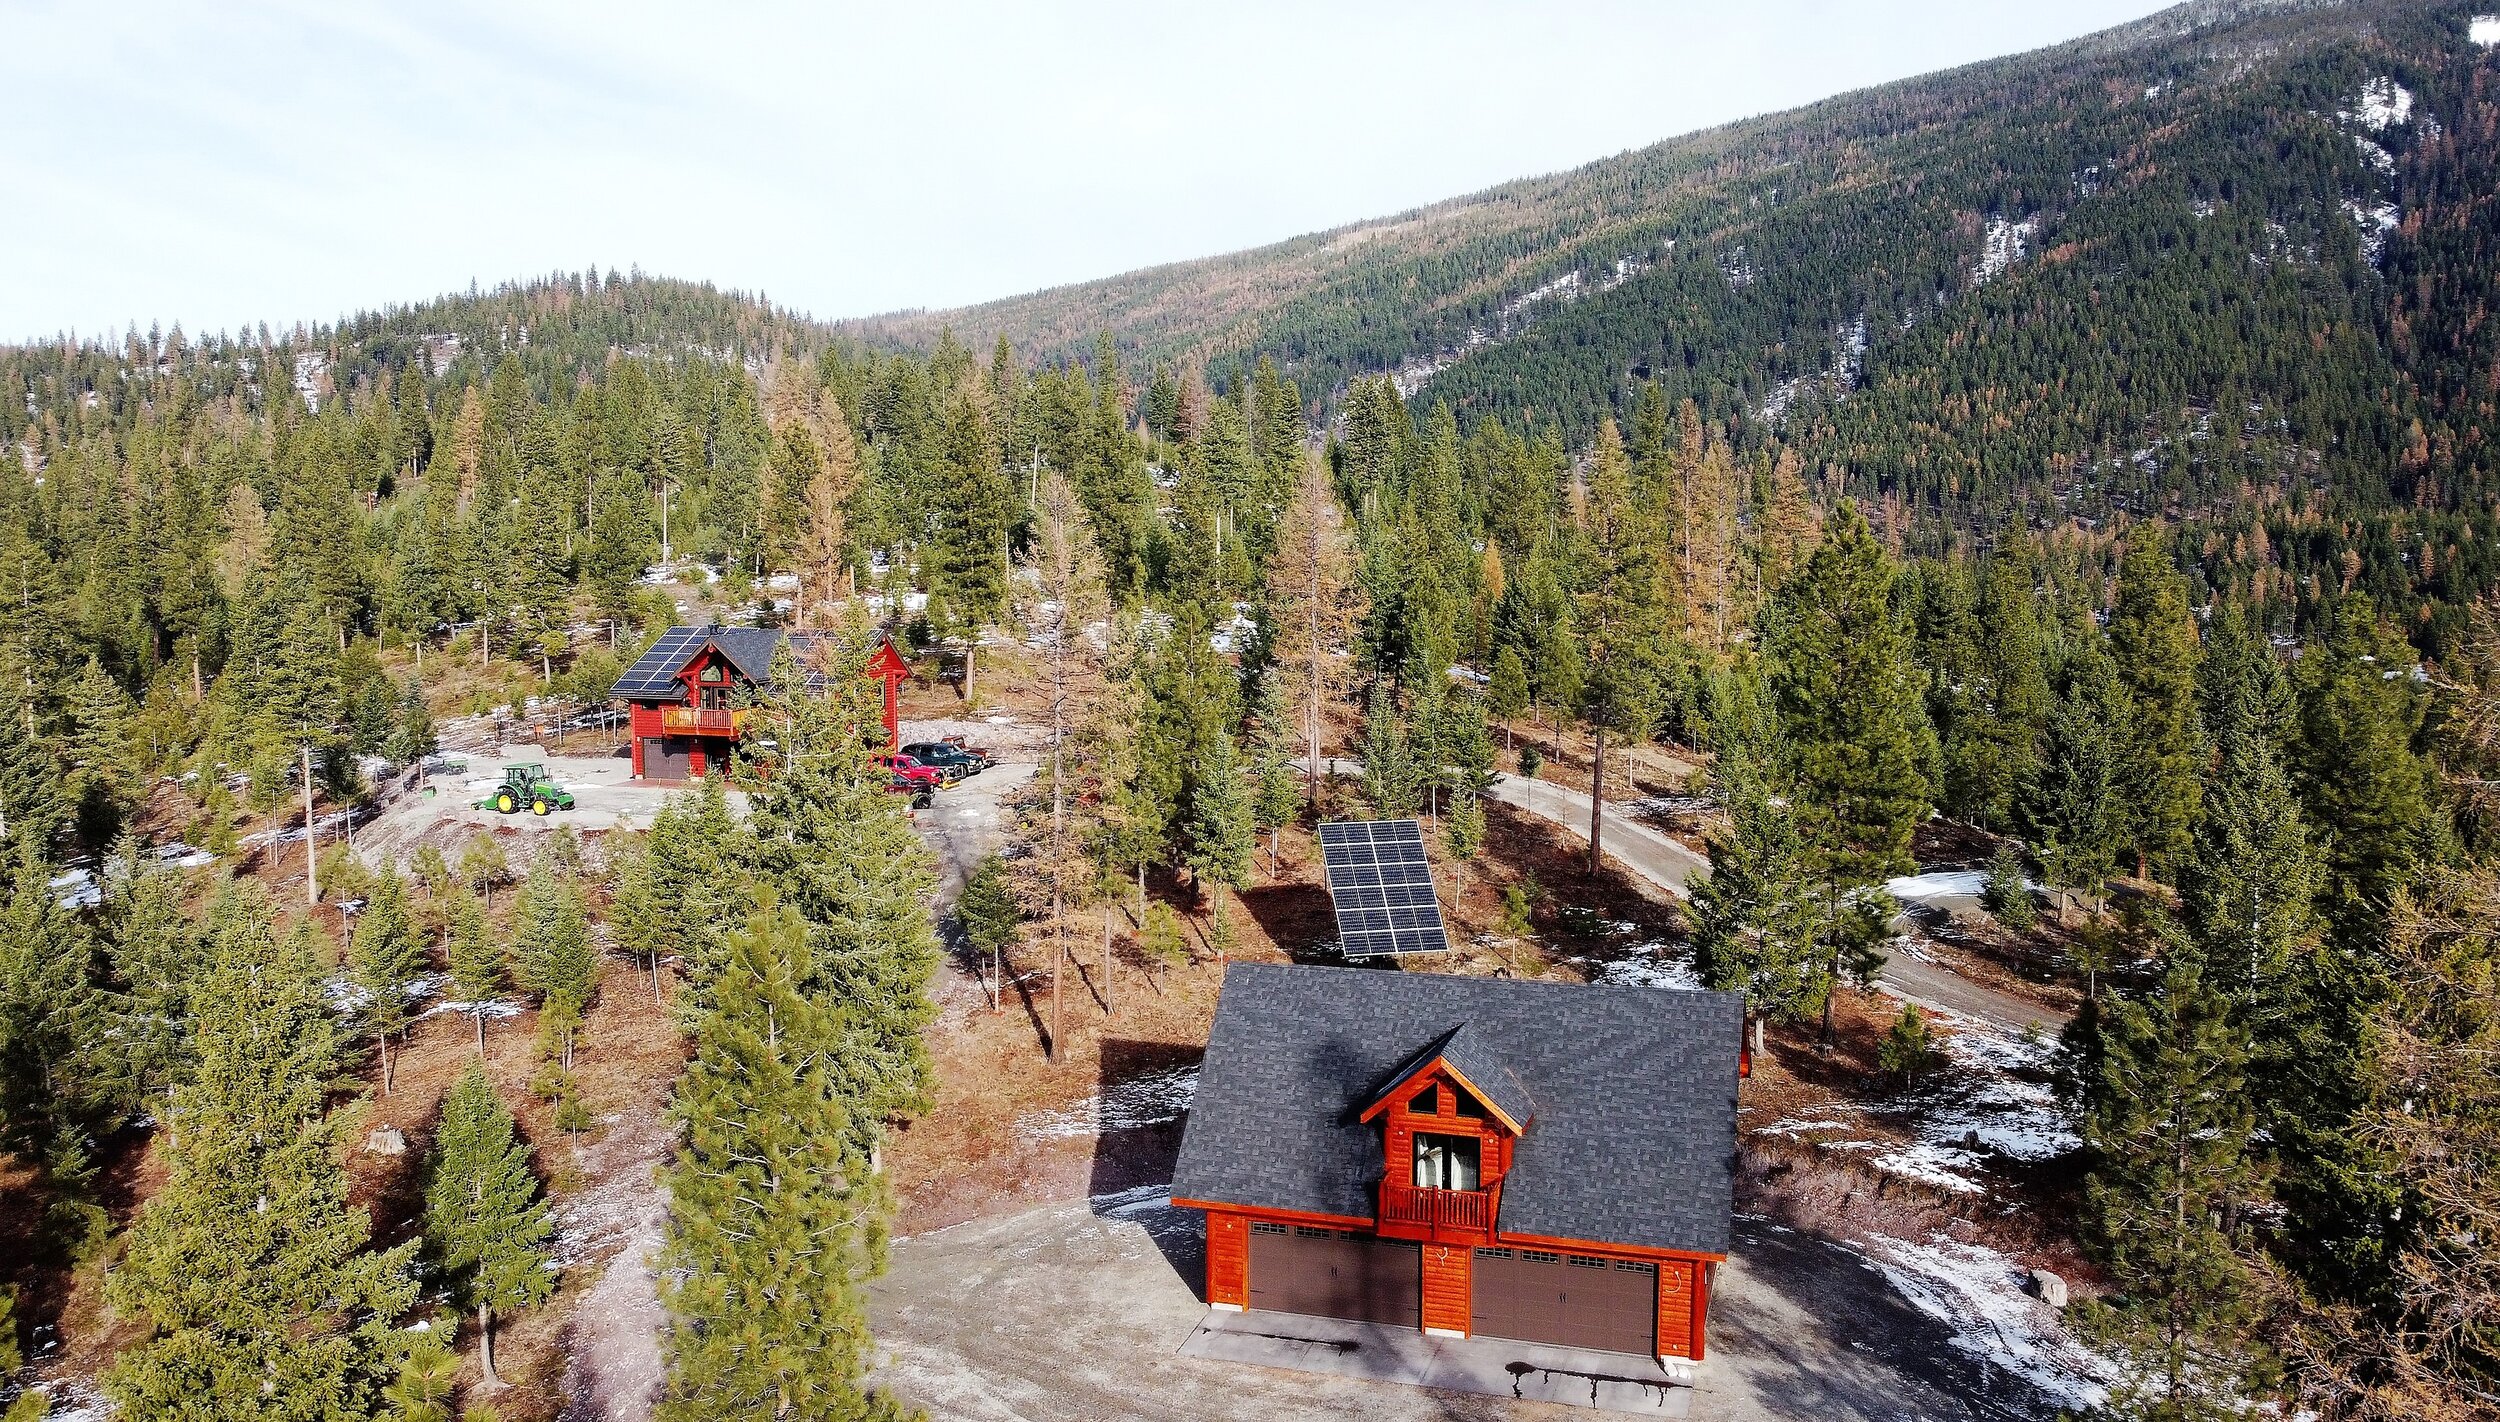 2020-11-29 High-Altitude View of SR Main & Guest House.JPG